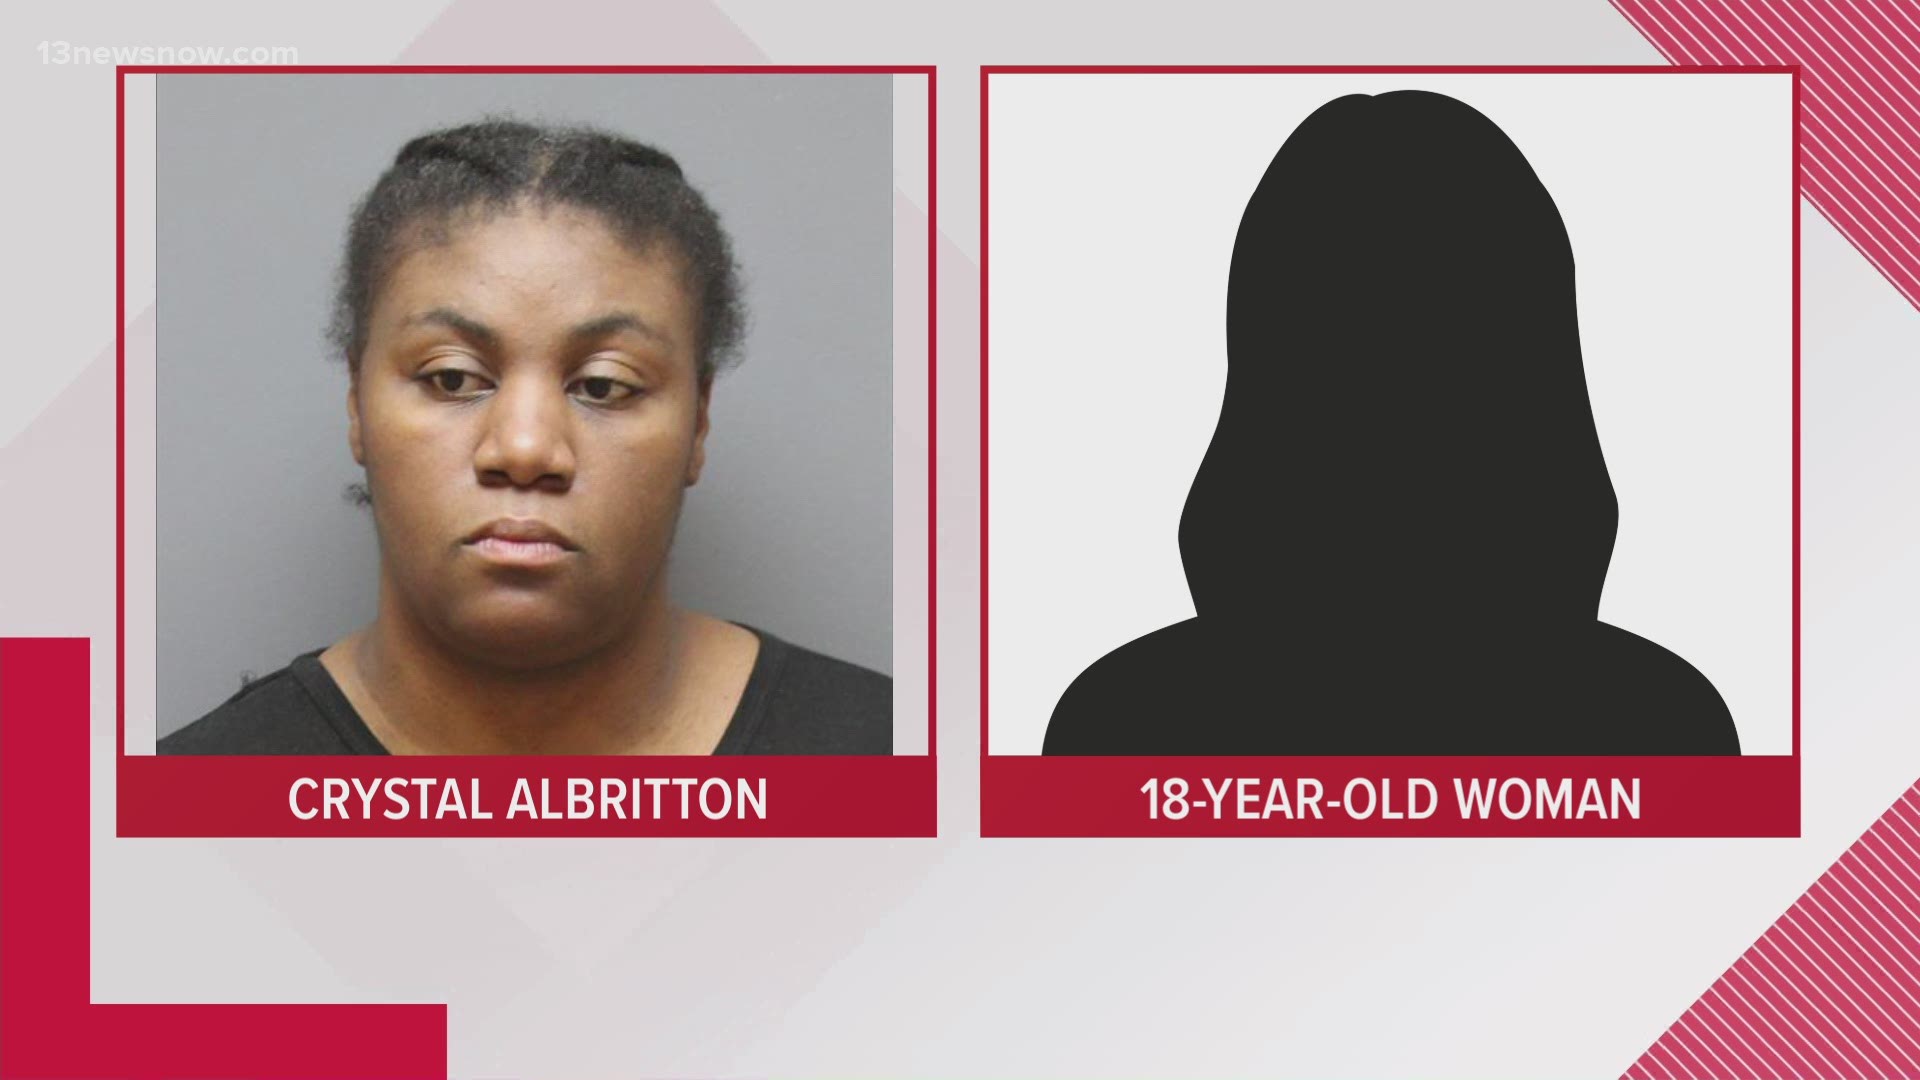 Both women were charged with first-degree murder. Police haven't released the identity of one of the women since she was a juvenile at the time of murder.